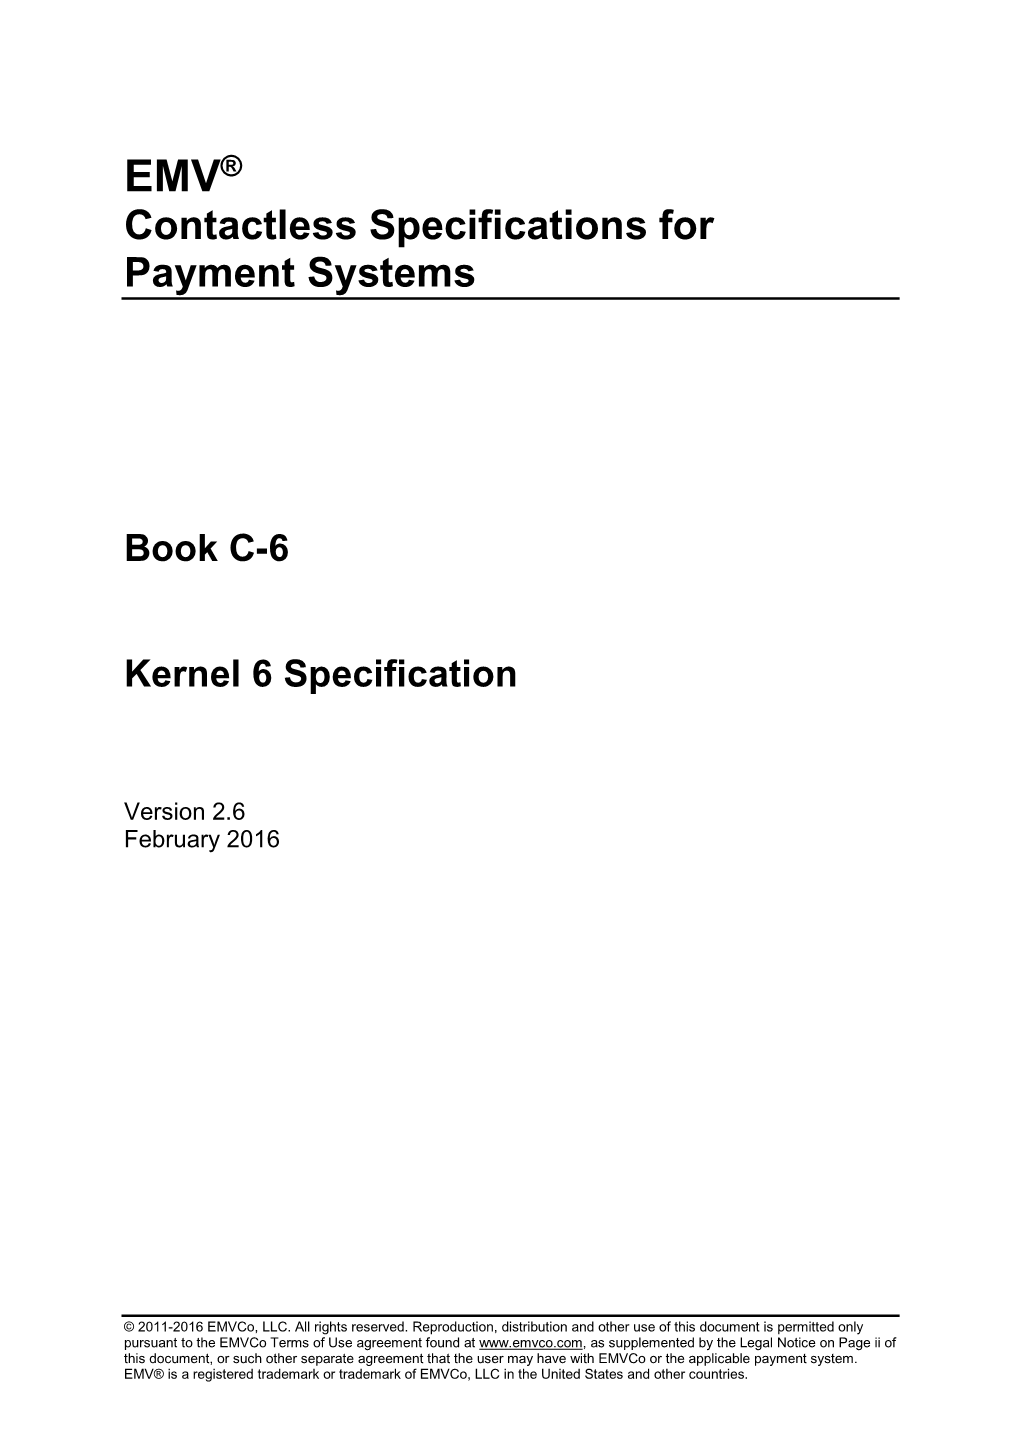 EMV® Contactless Specifications for Payment Systems